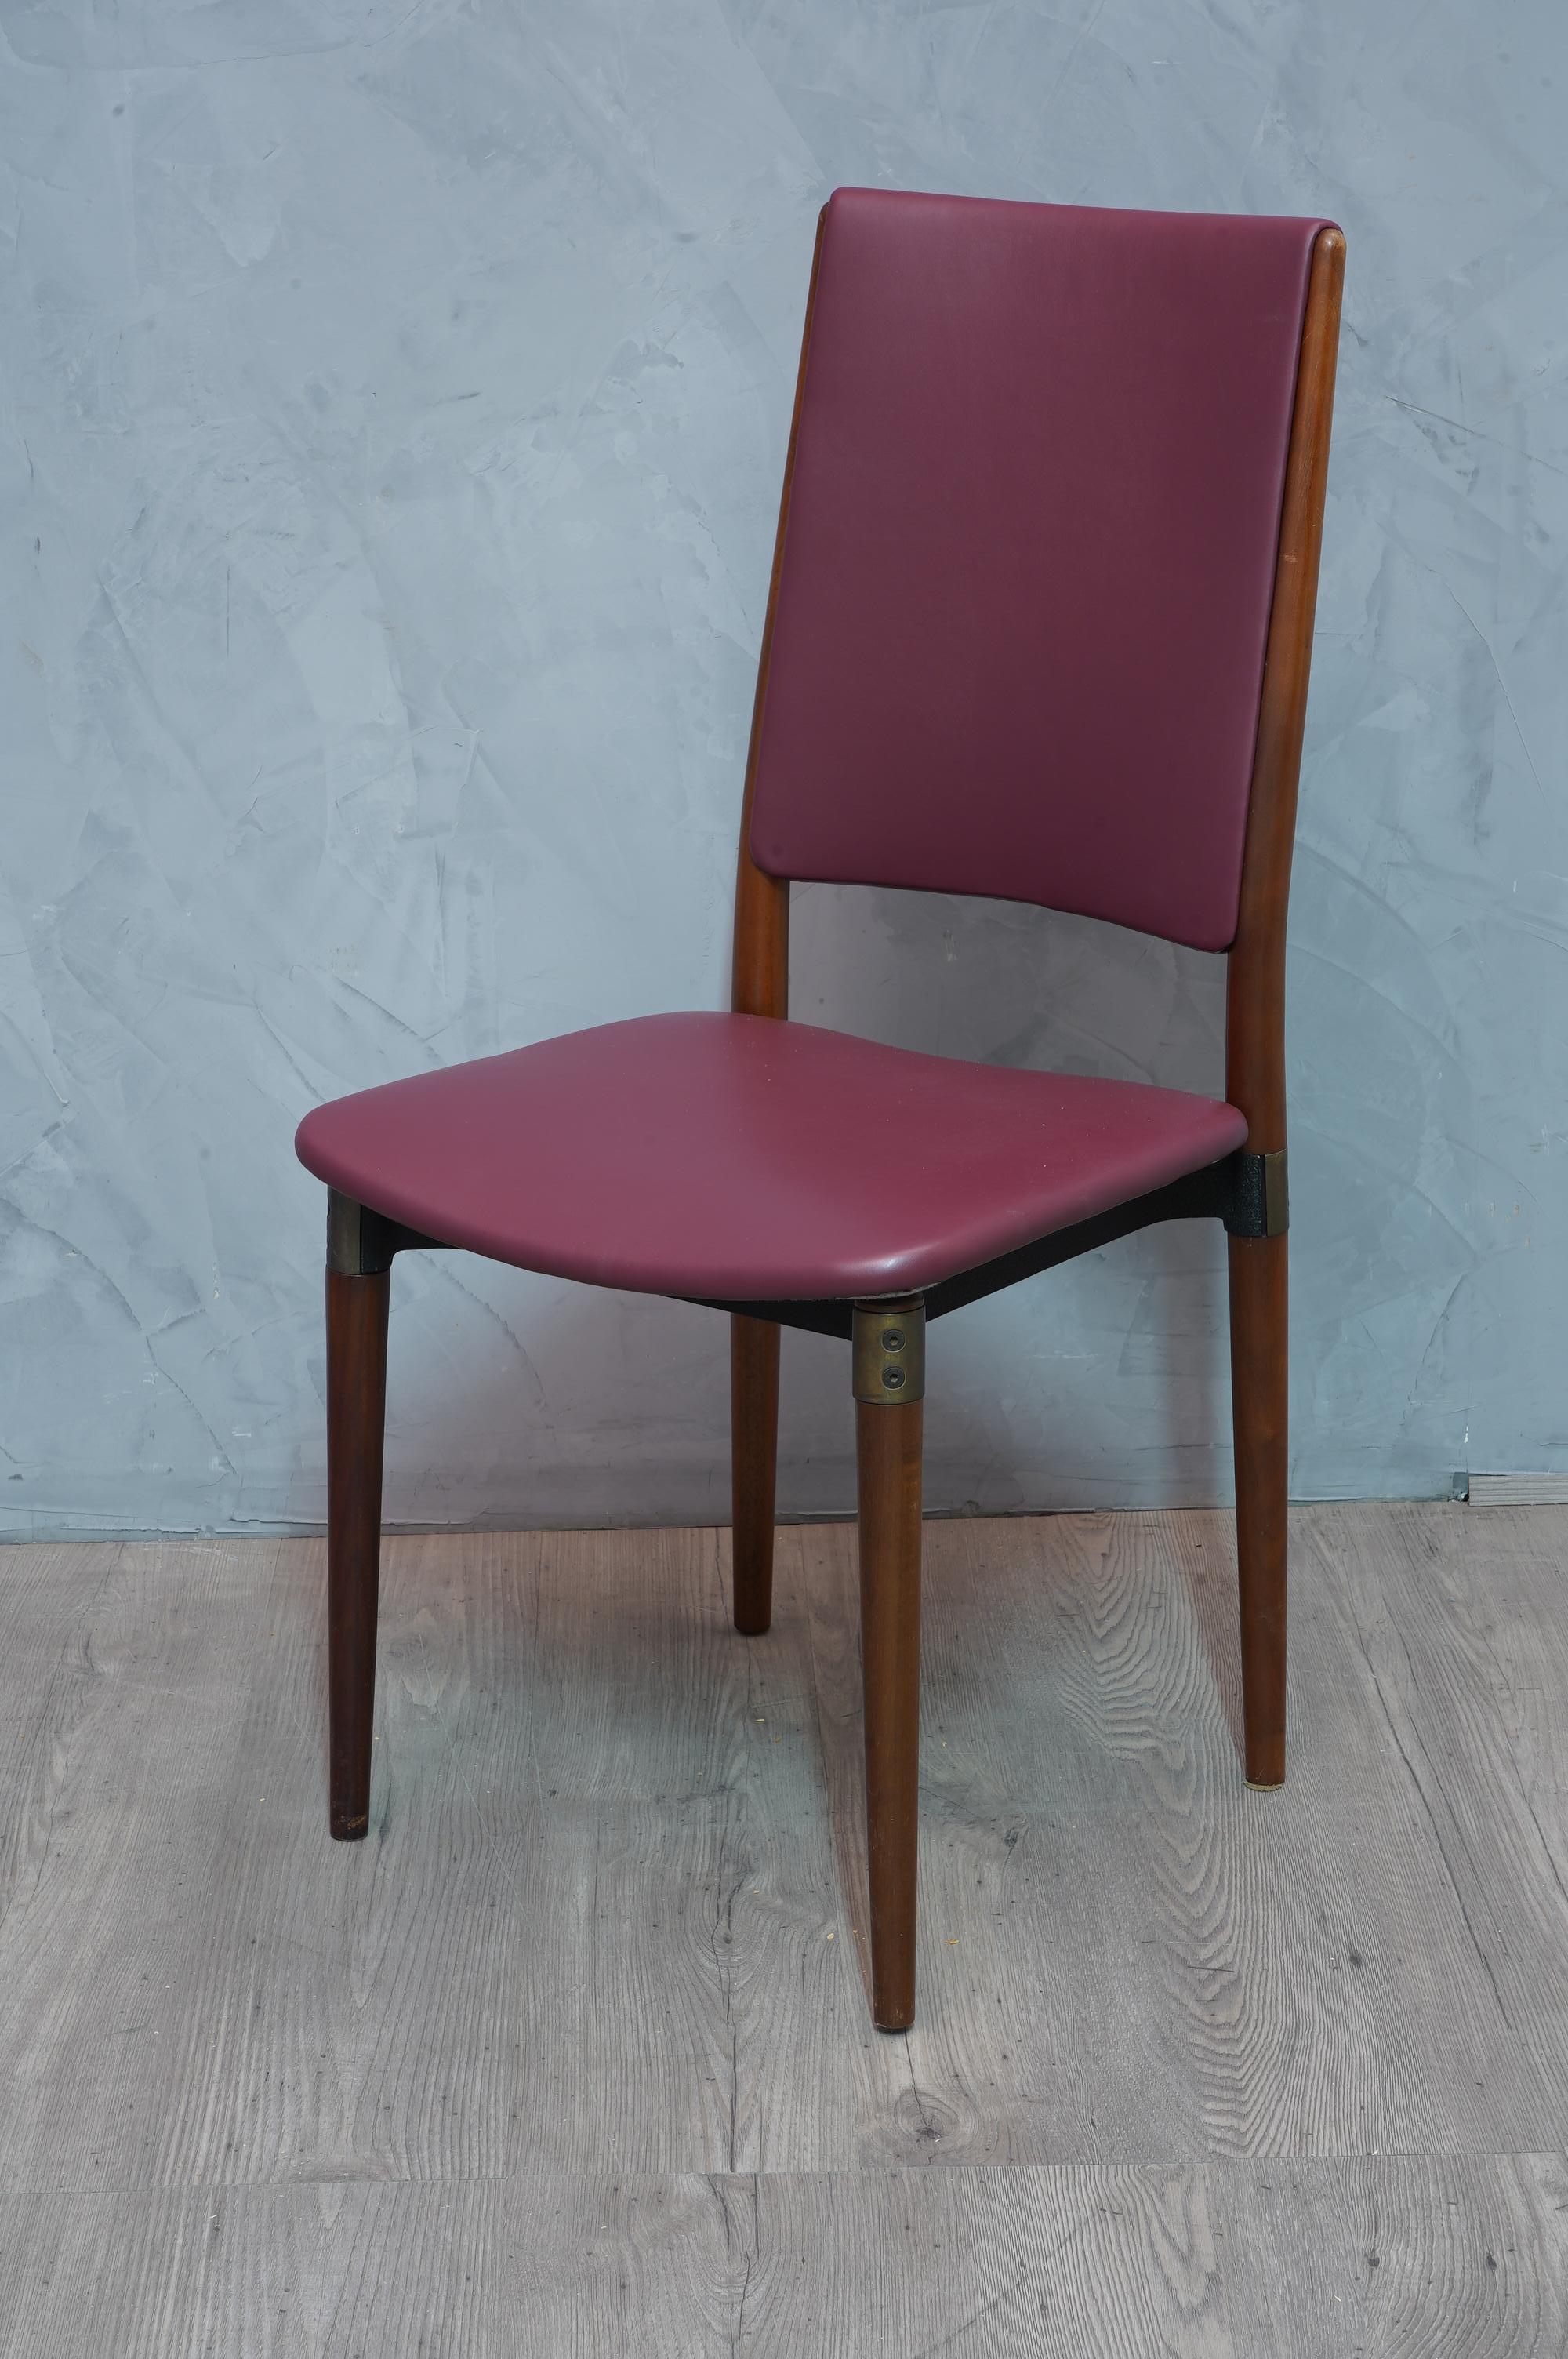 Mid-20th Century Osvaldo Borsani for Tecno Wood and Leather Chairs, 1960 For Sale